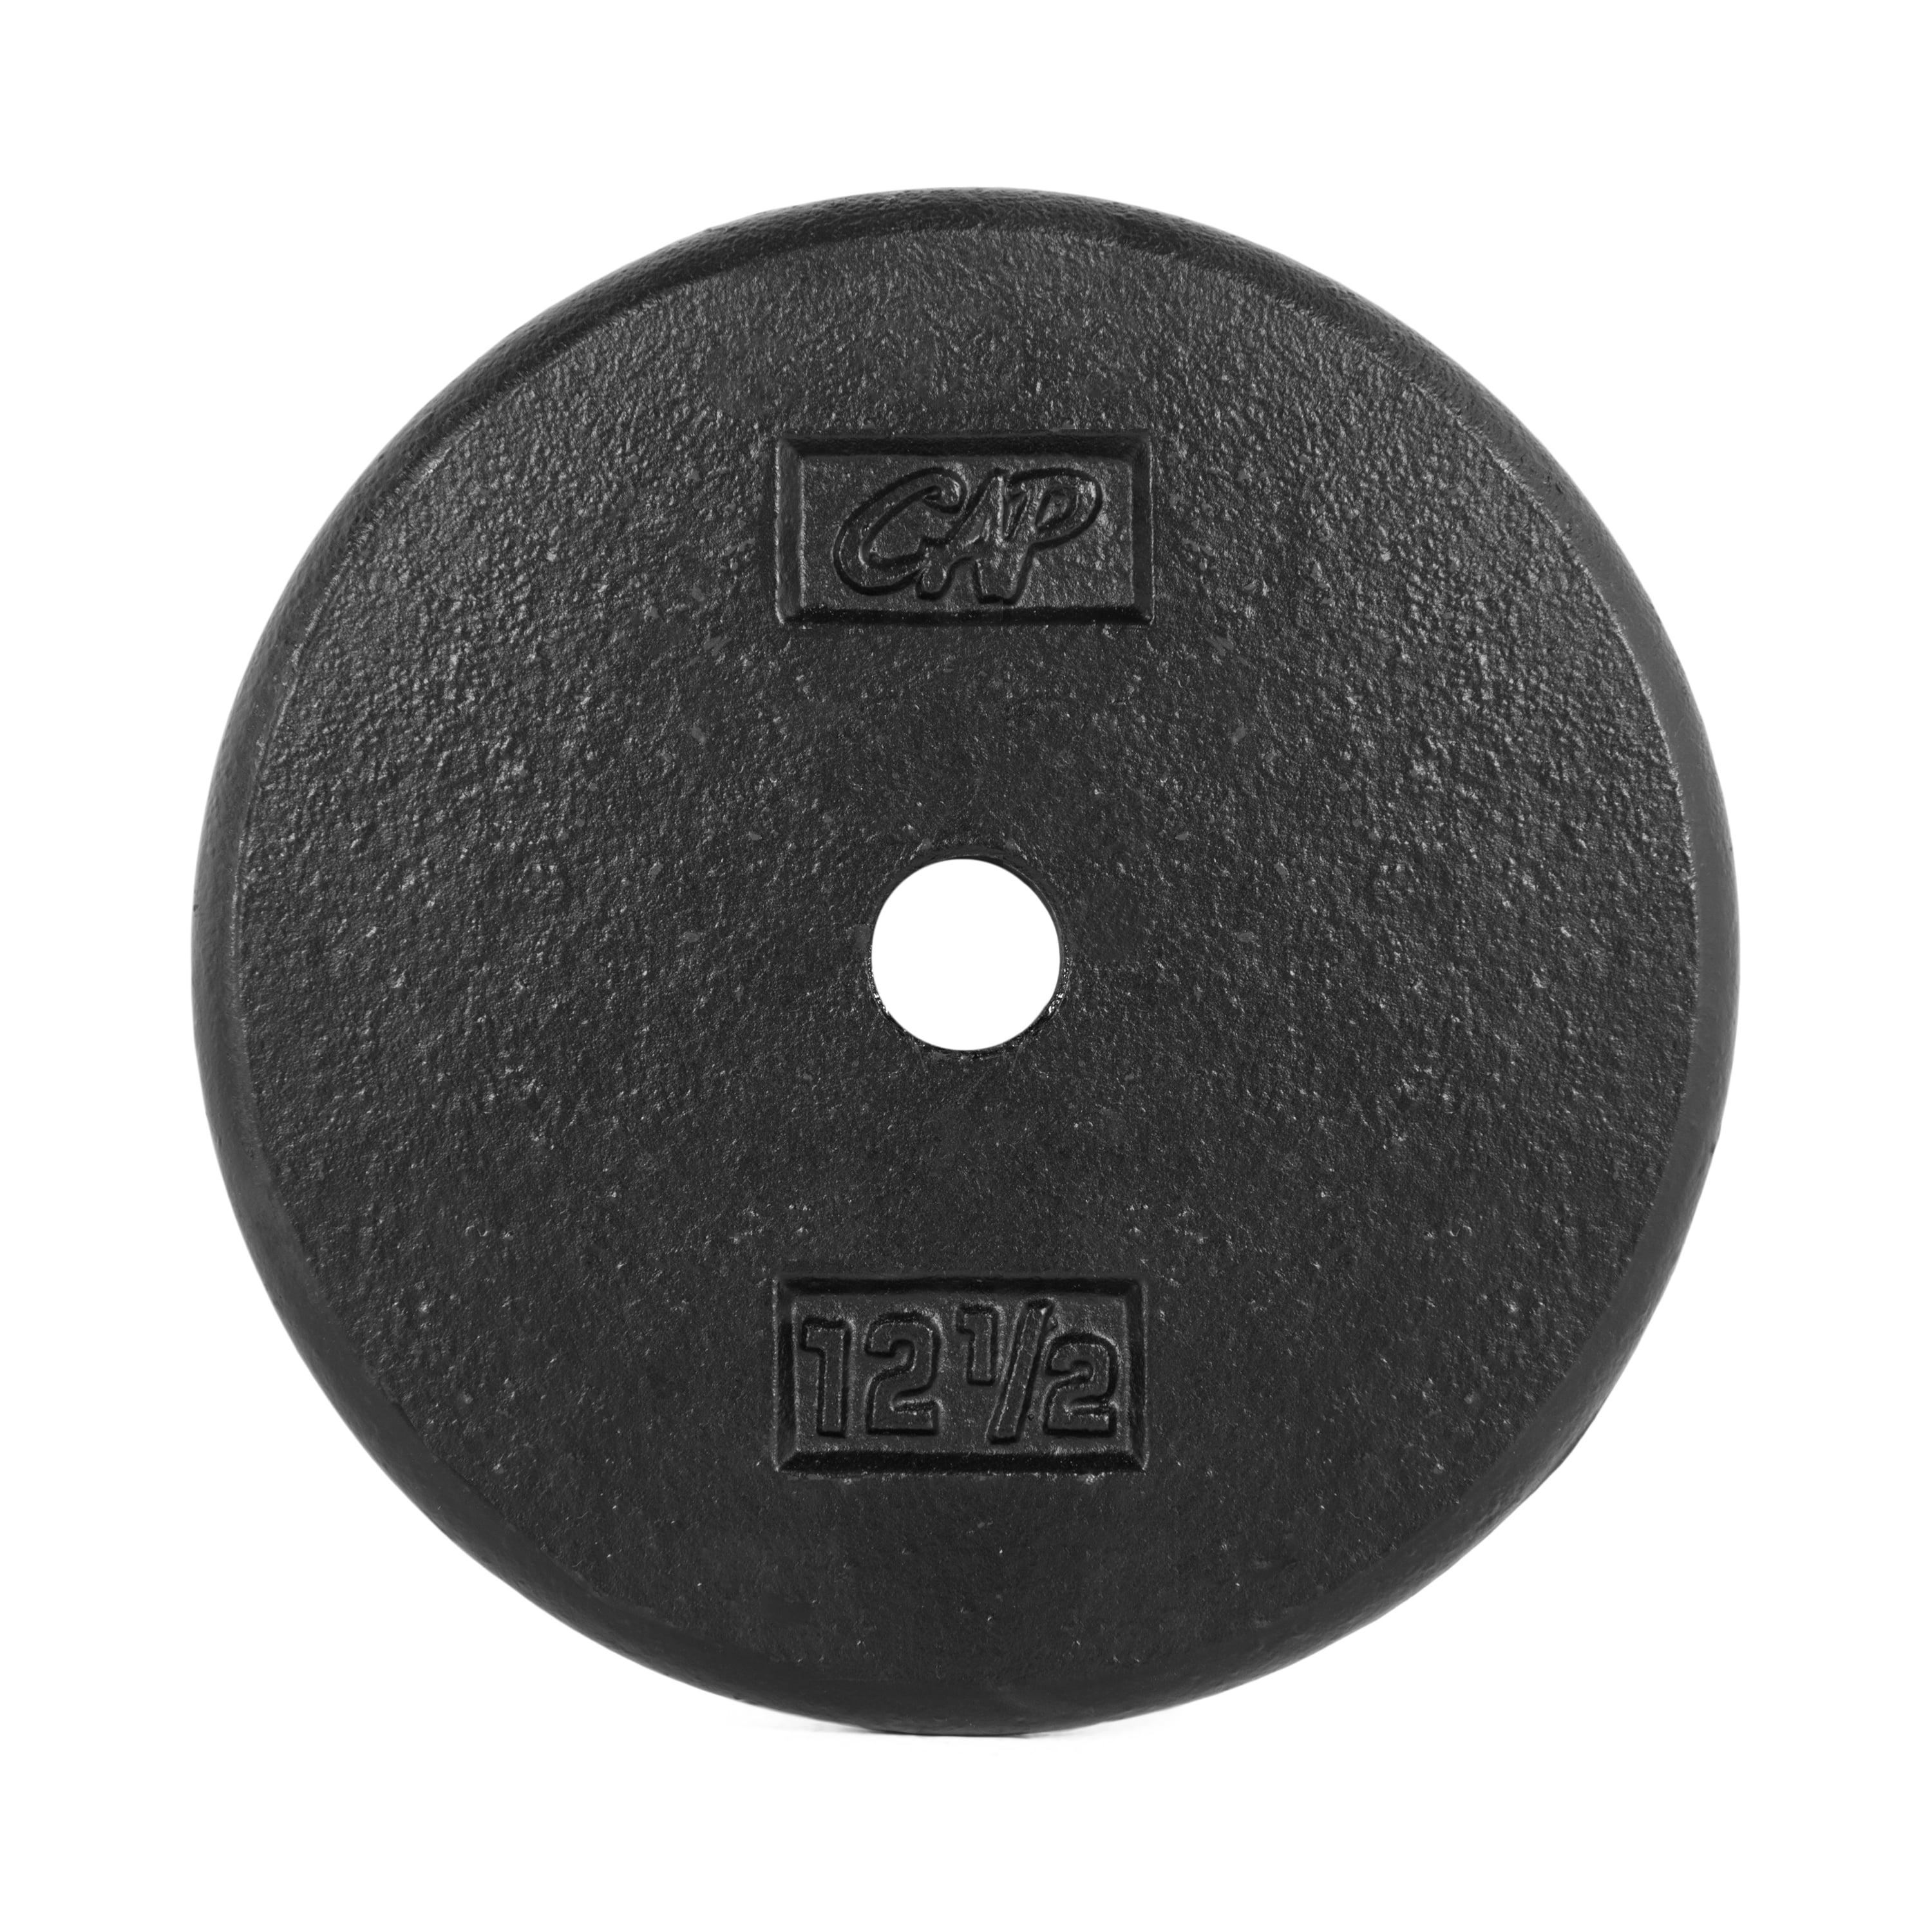 20 Sing 15 7.5 10 Yes4All Standard 1-Inch Cast Iron Weight Plates 5 25 Lbs 